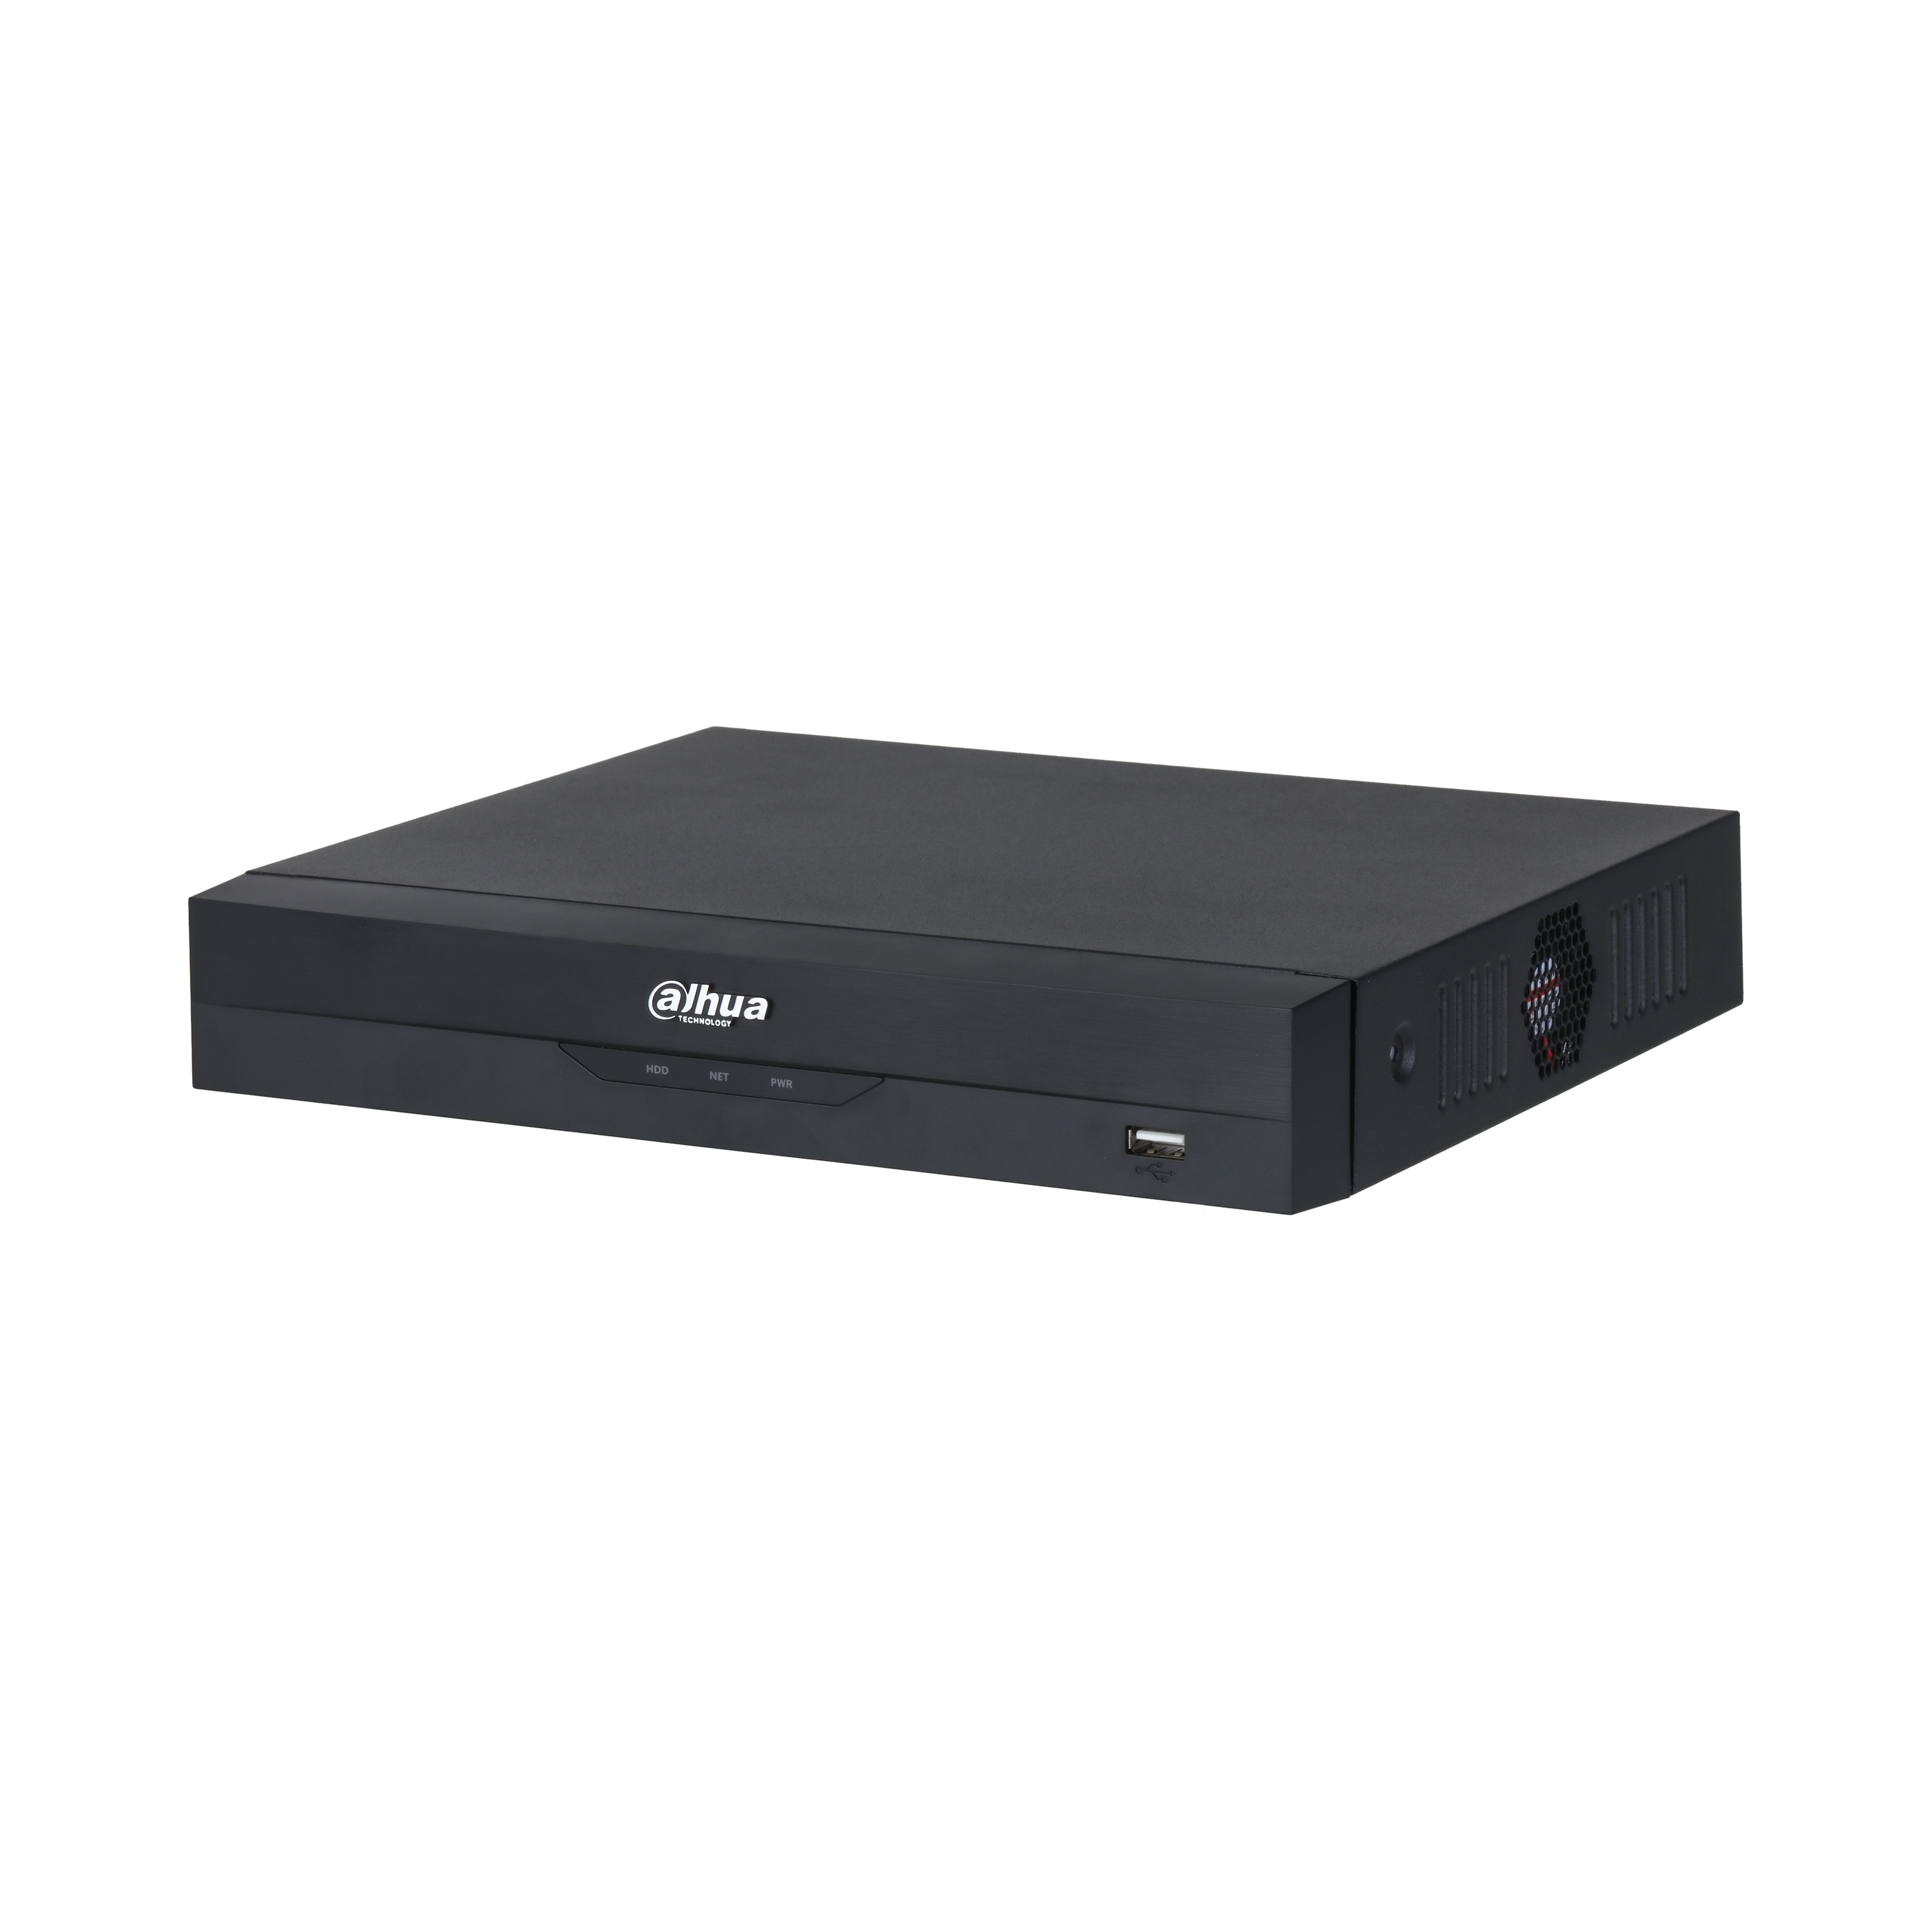 DHI-NVR2108HS-8P-I2 - Dahua - 8 Channel Compact 1U 8PoE 1HDD WizSense Network Video Recorder